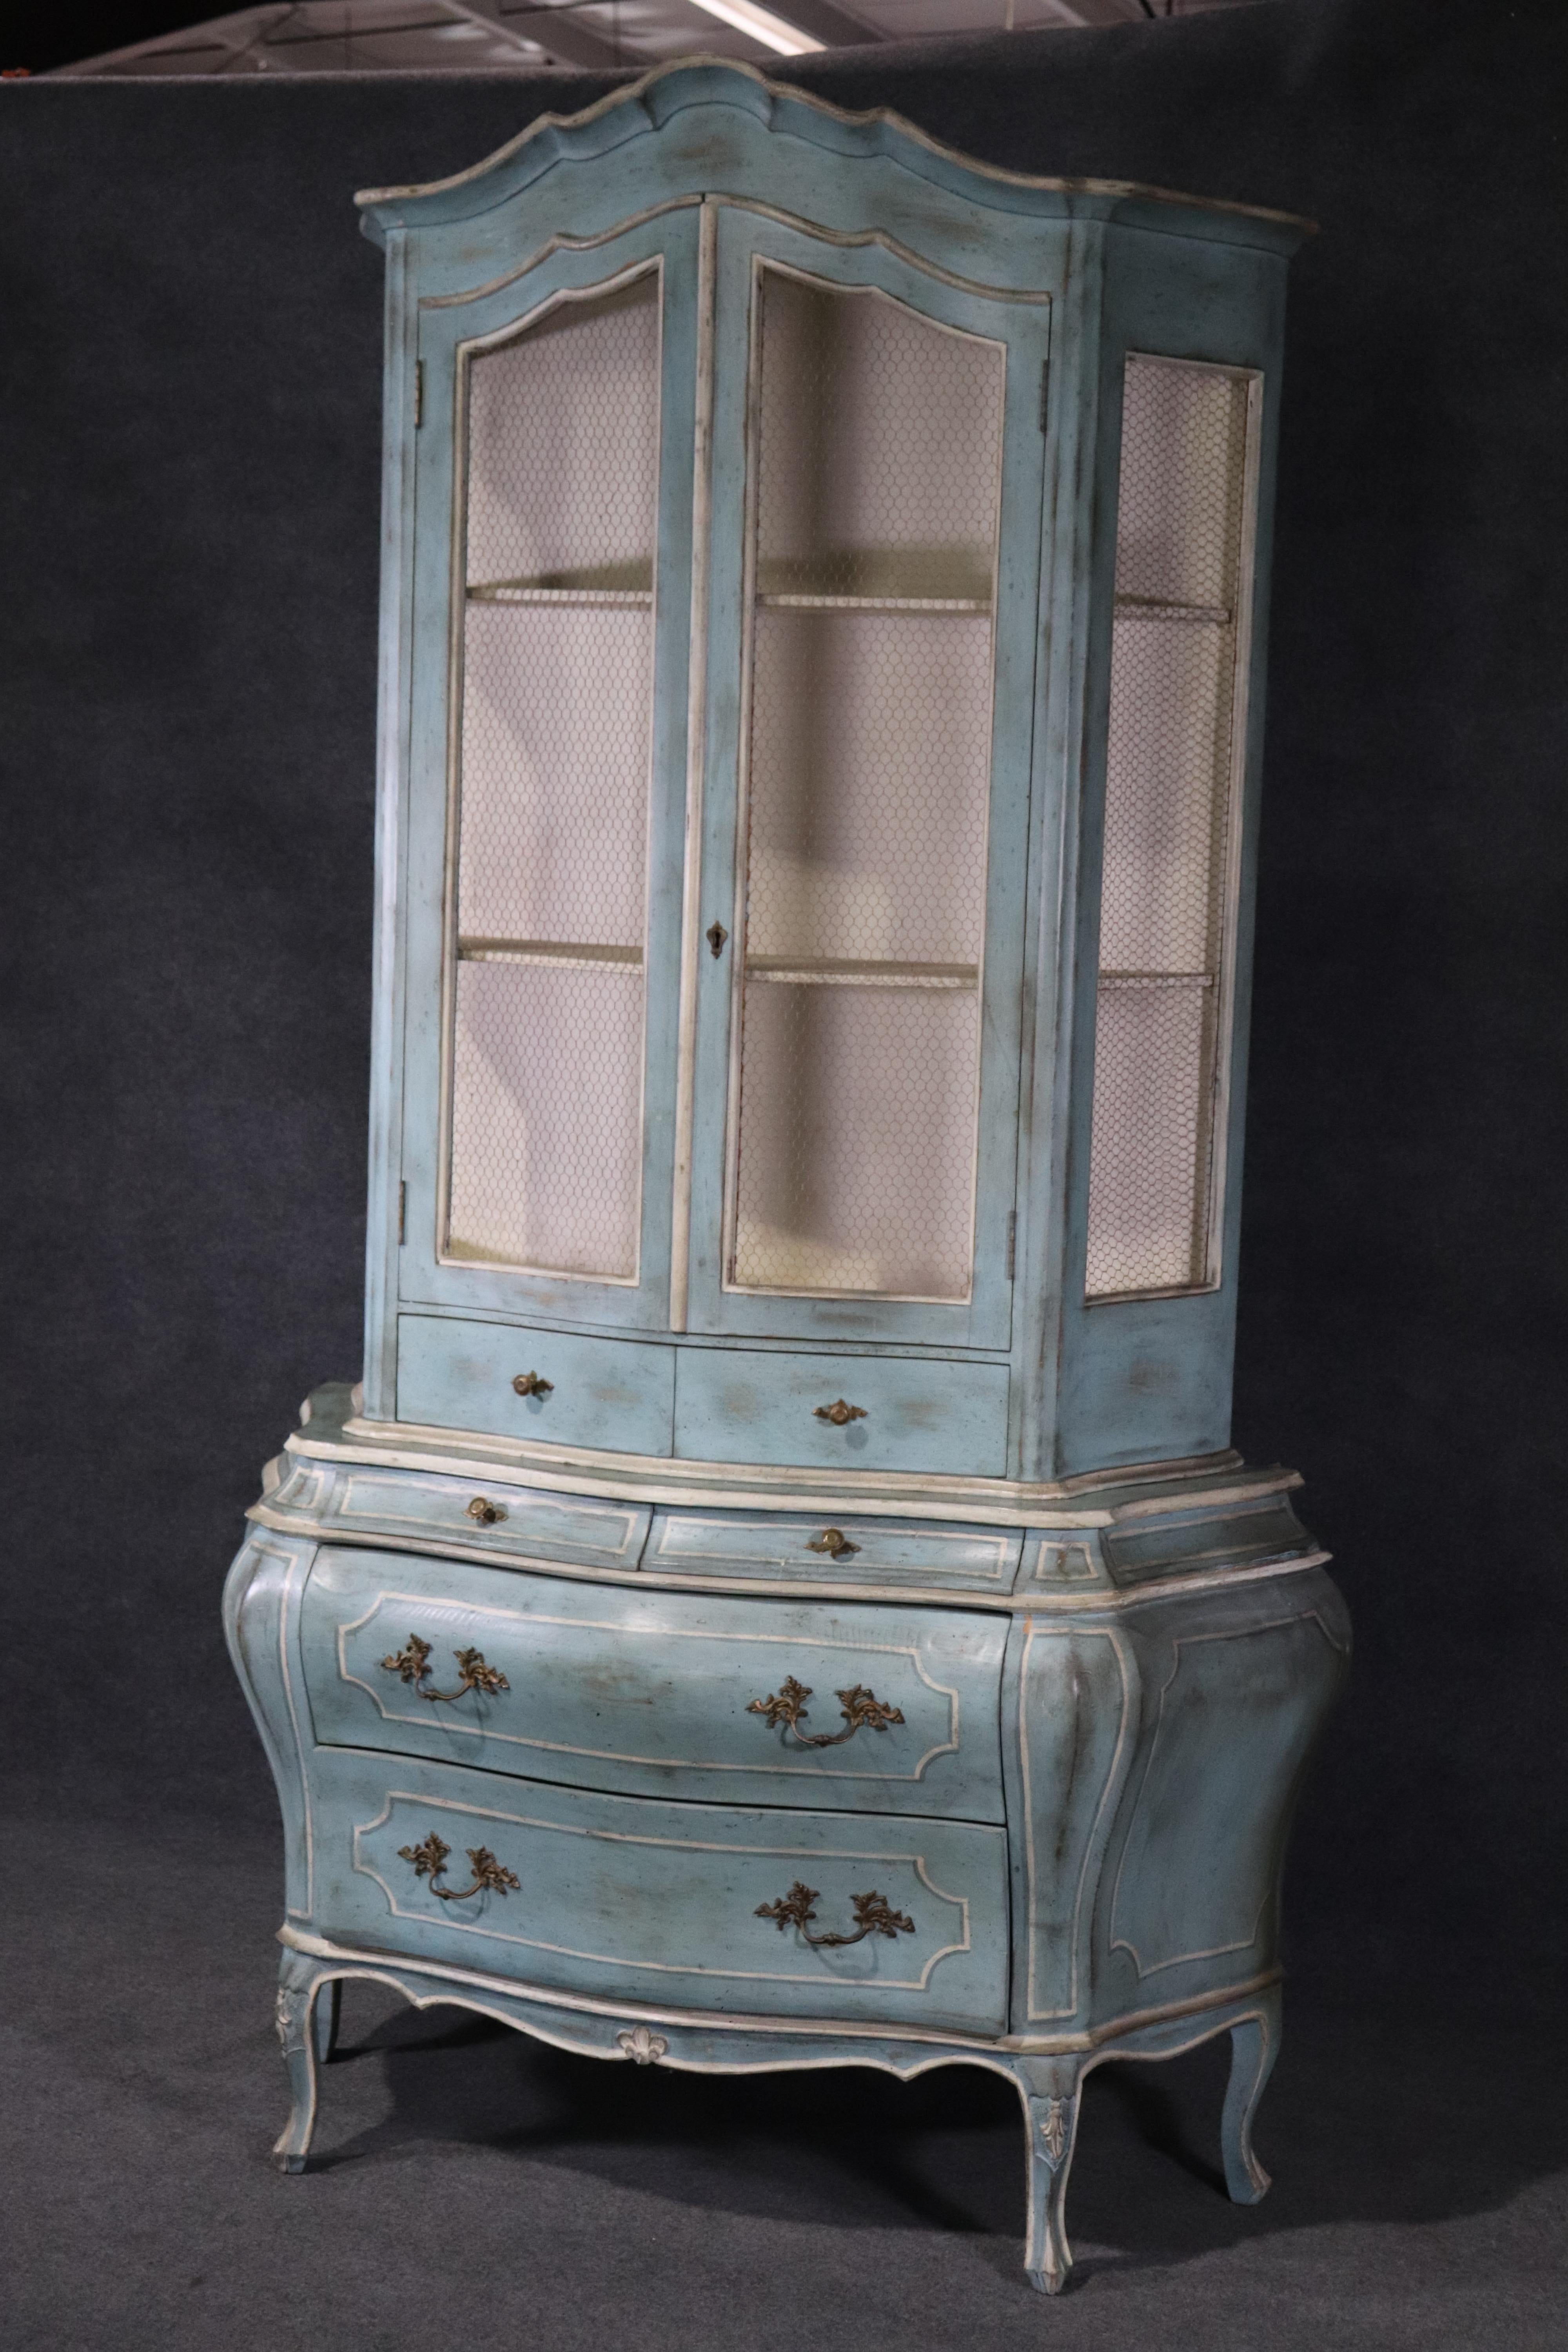 This is a stunning antique paint decorated china cabinet from Italy. The cabinet has a gorgeous blue exterior and an antique glaze on top. The doors have an open mesh wire system. This is an eye catching piece and dates to the 1950s. Measures 88